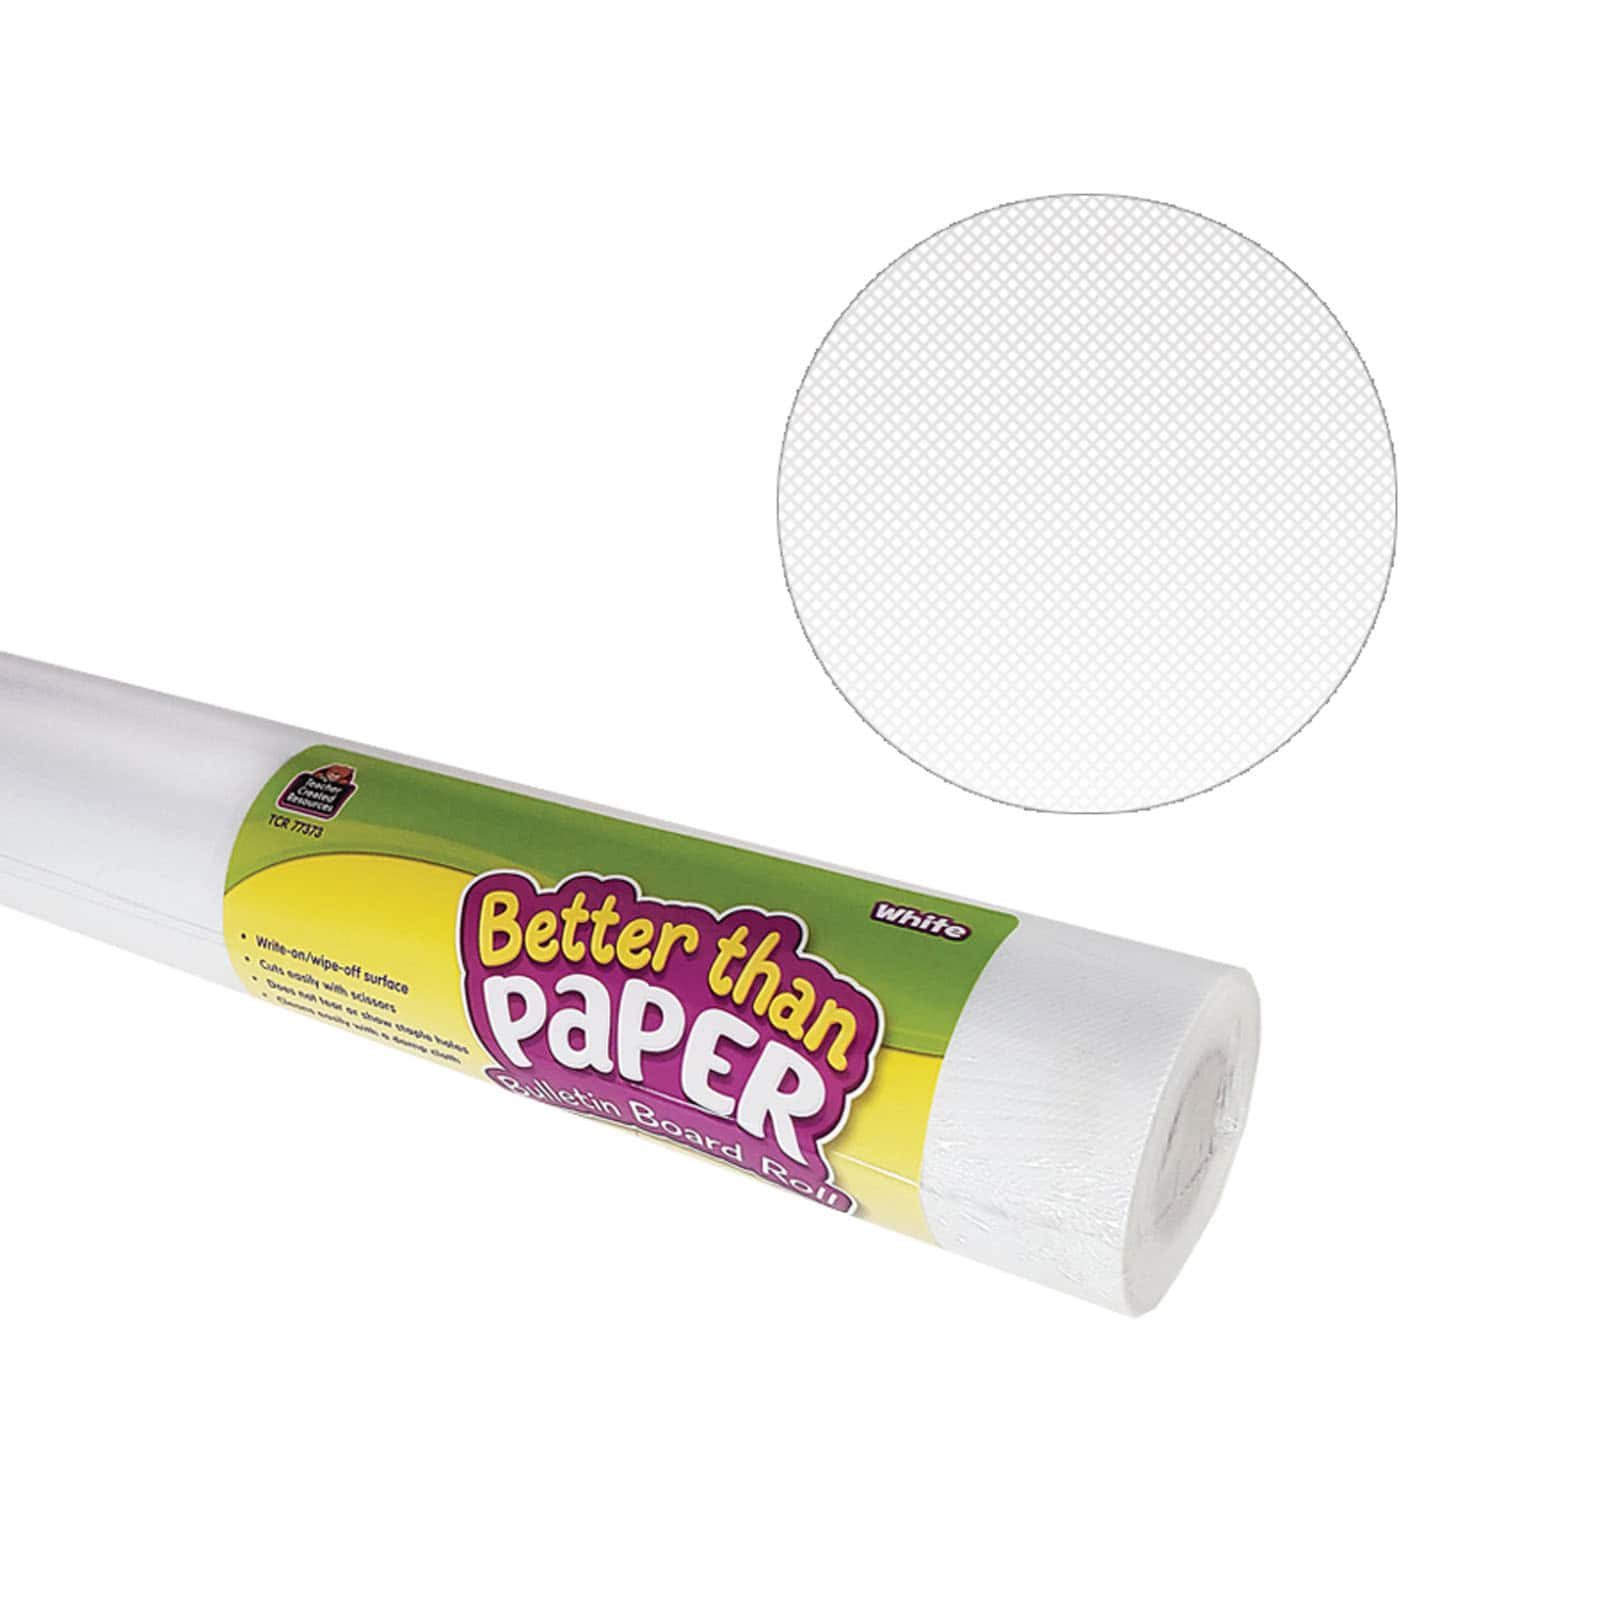 Teacher Created Resources® Better Than Paper® Bulletin Board Paper Rolls,  4' x 12', Royal Blue, Pack Of 4 Rolls